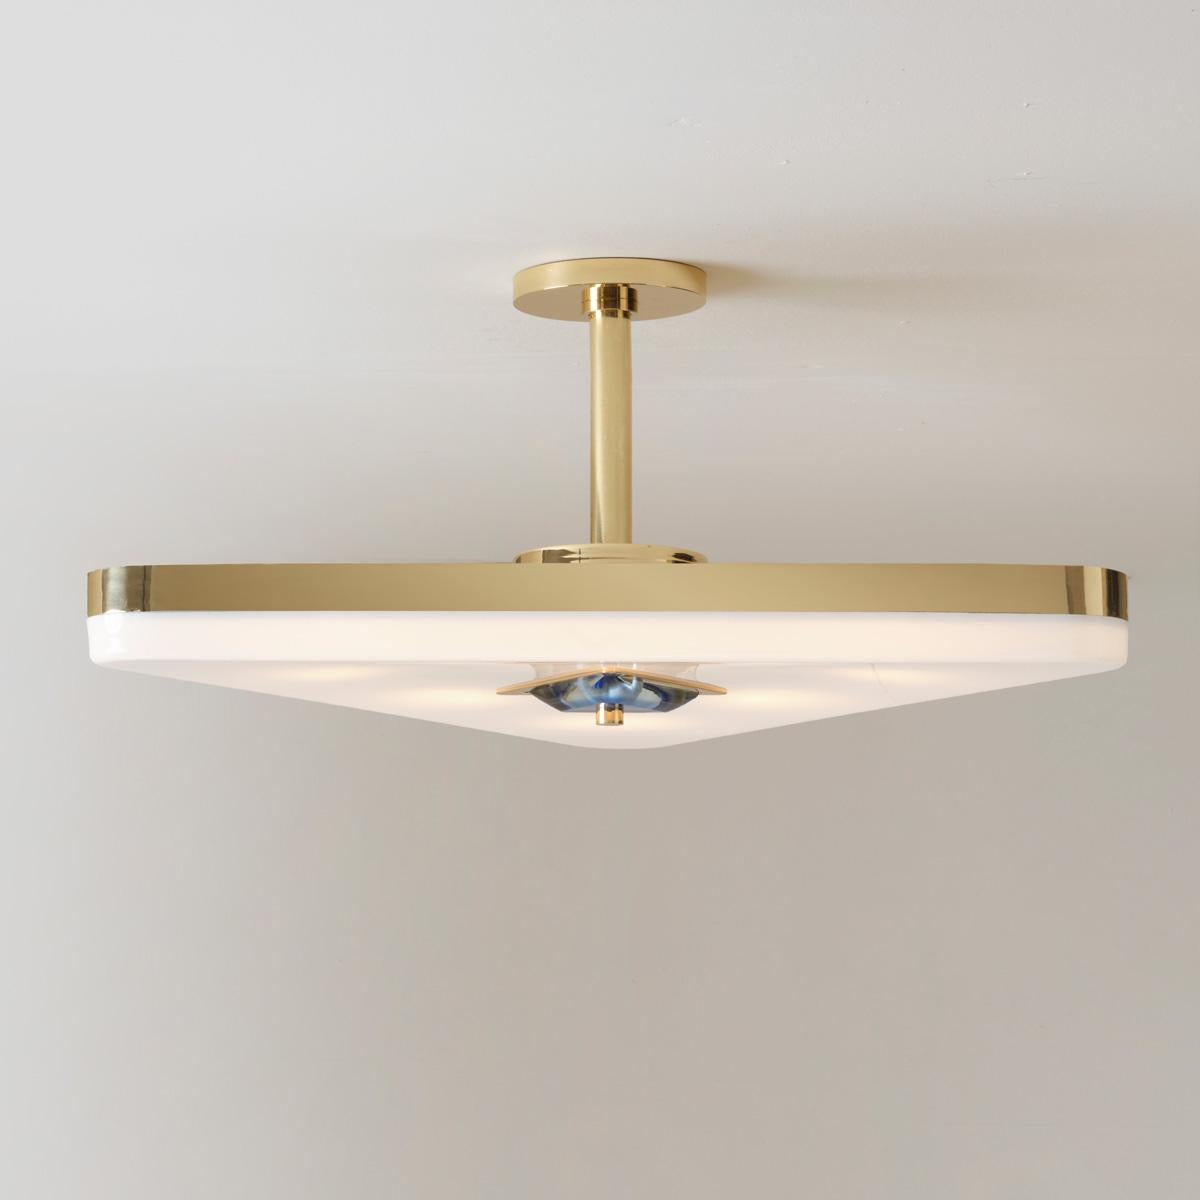 Italian Iris Triangle Ceiling Light by Gaspare Asaro. Polished Brass Finish For Sale